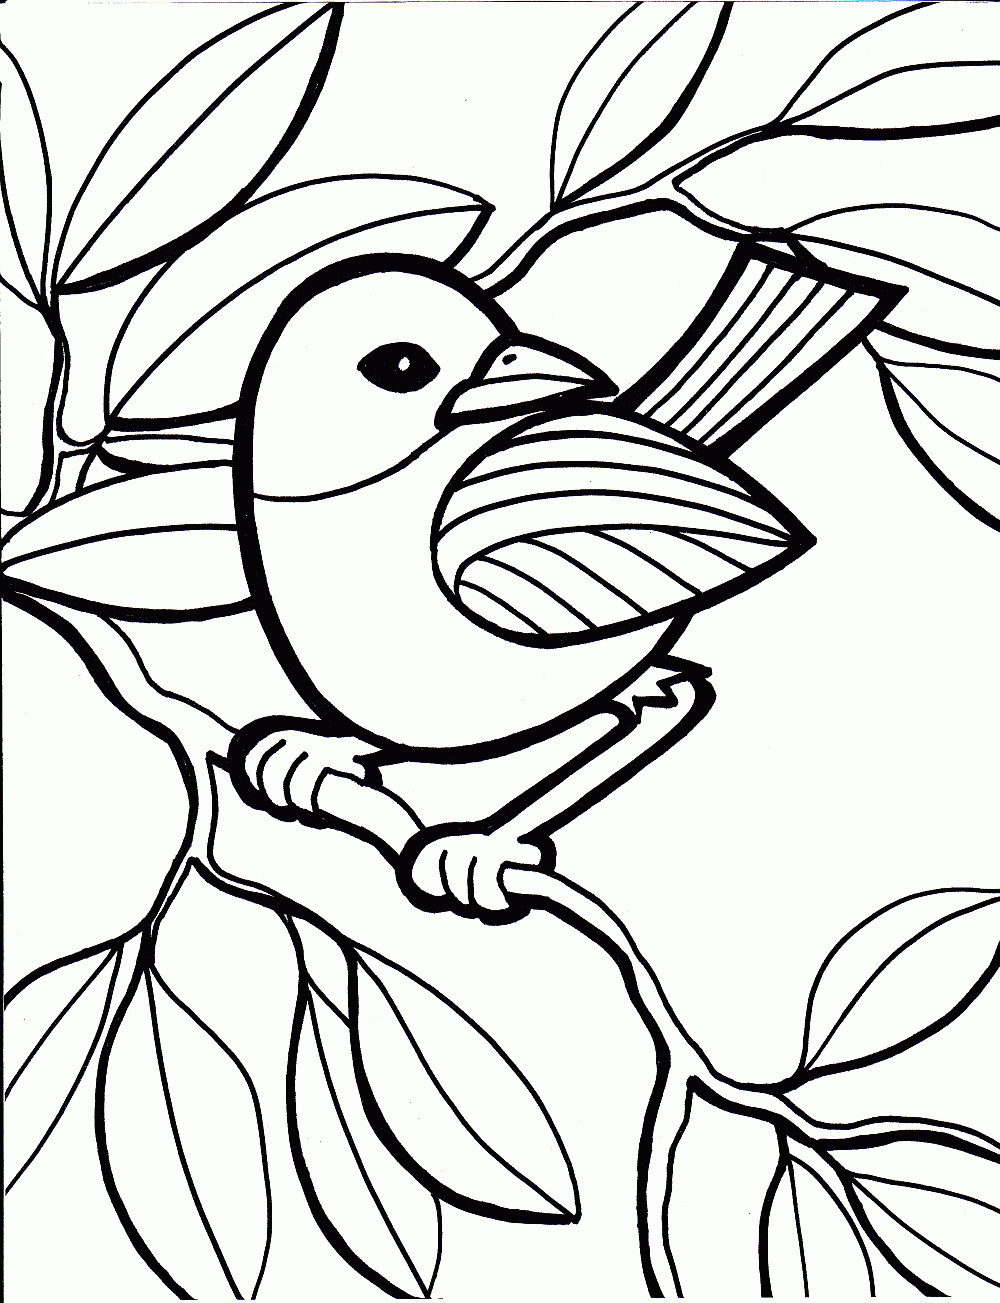 Coloring Pages For Elderly Adults at GetColoringscom